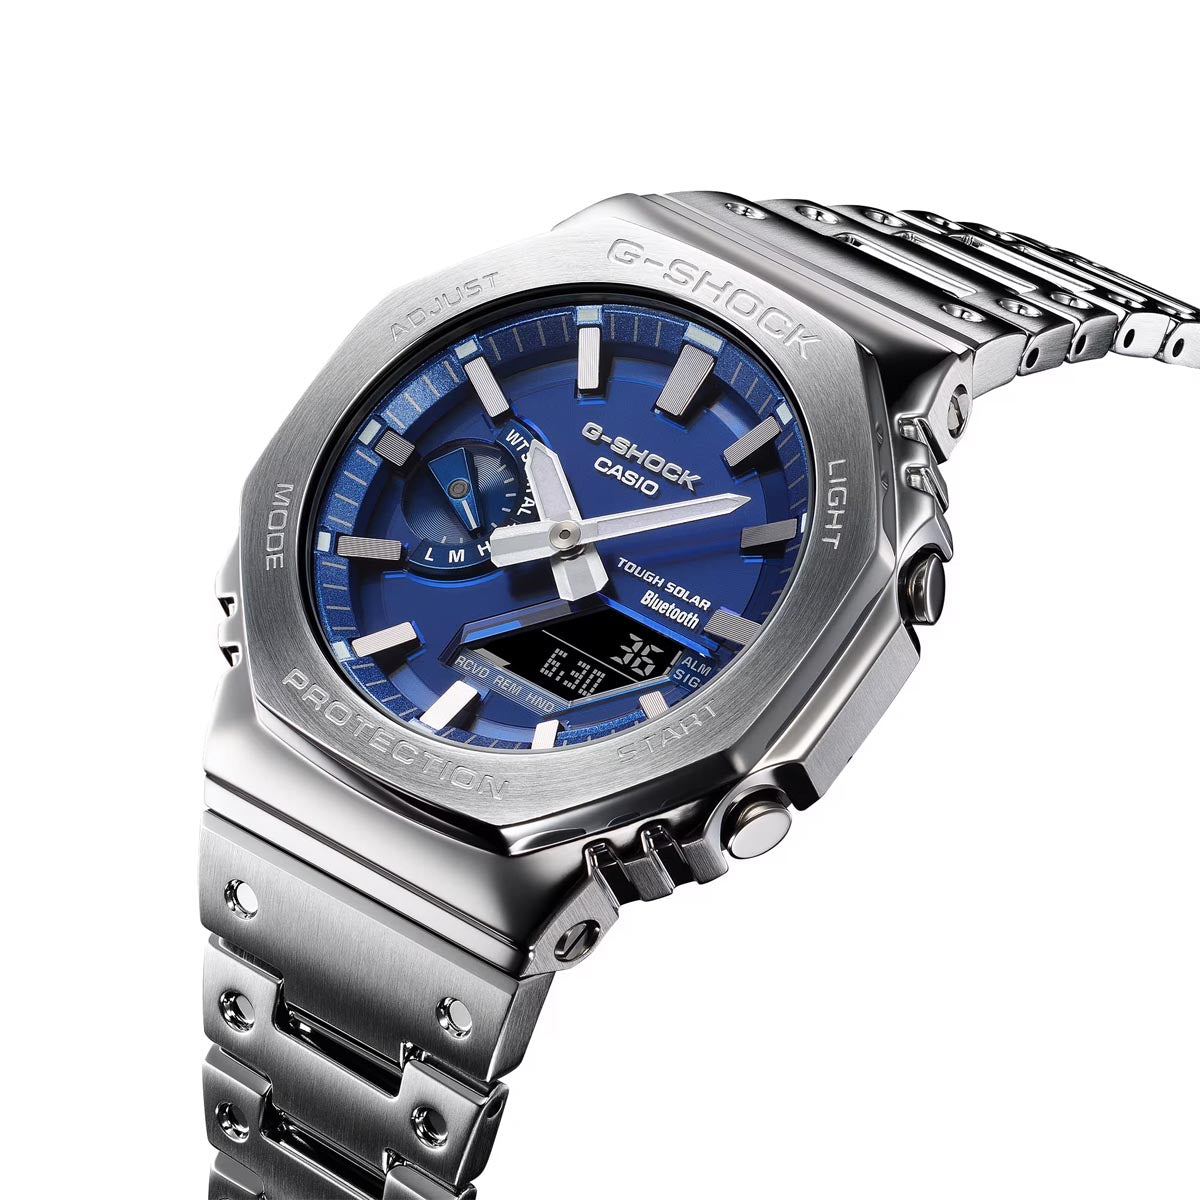 G-Shock 2100 Series Full Metal Mens Watch with Blue Dial and Stainless Steel Bracelet (solar movement)